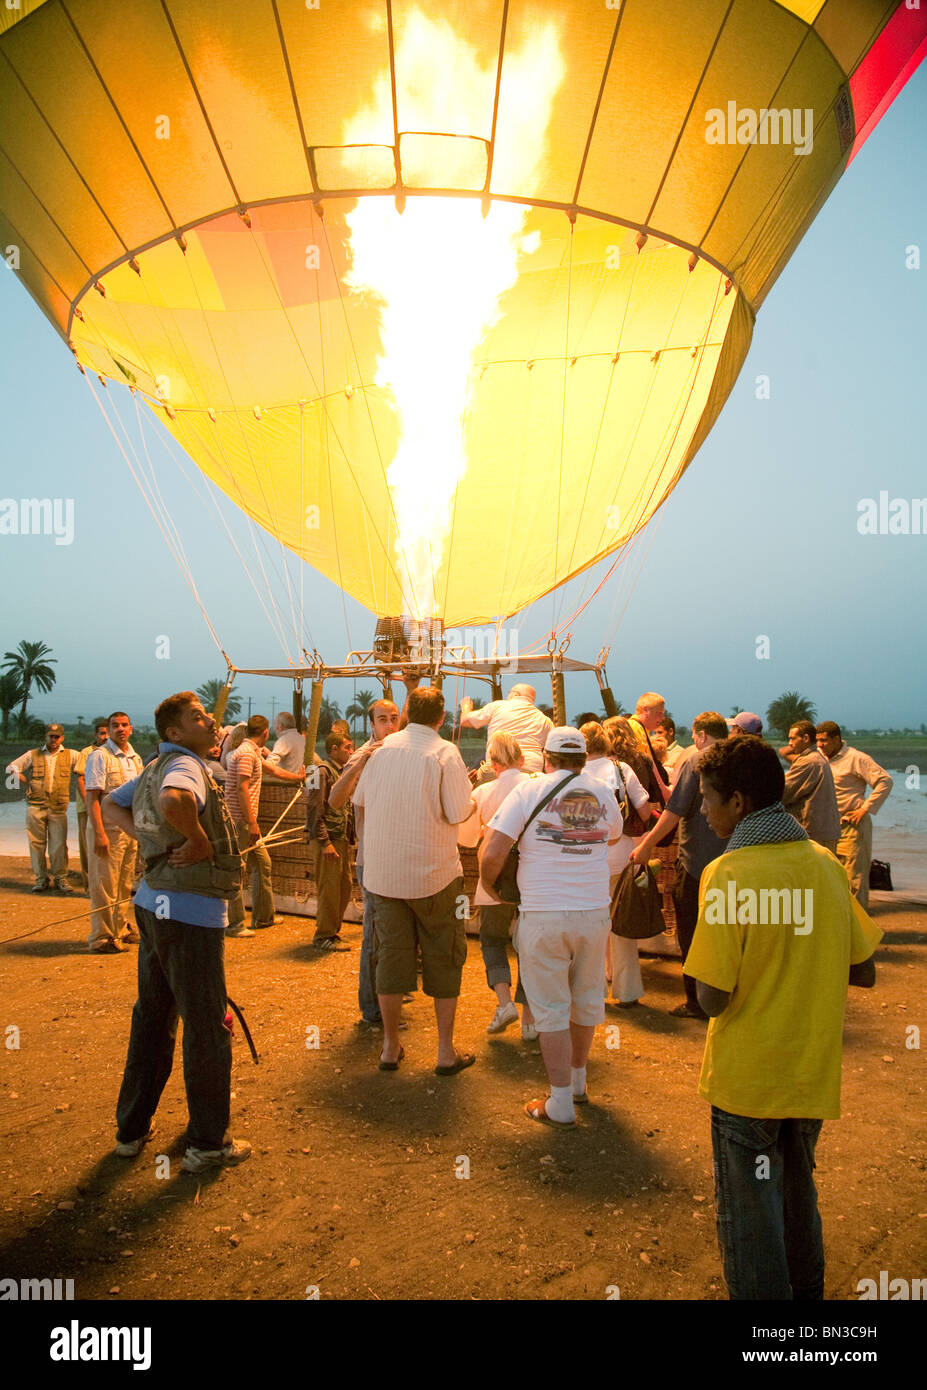 A hot air balloon and passengers preparing to lift off at dawn, Luxor, Egypt Stock Photo